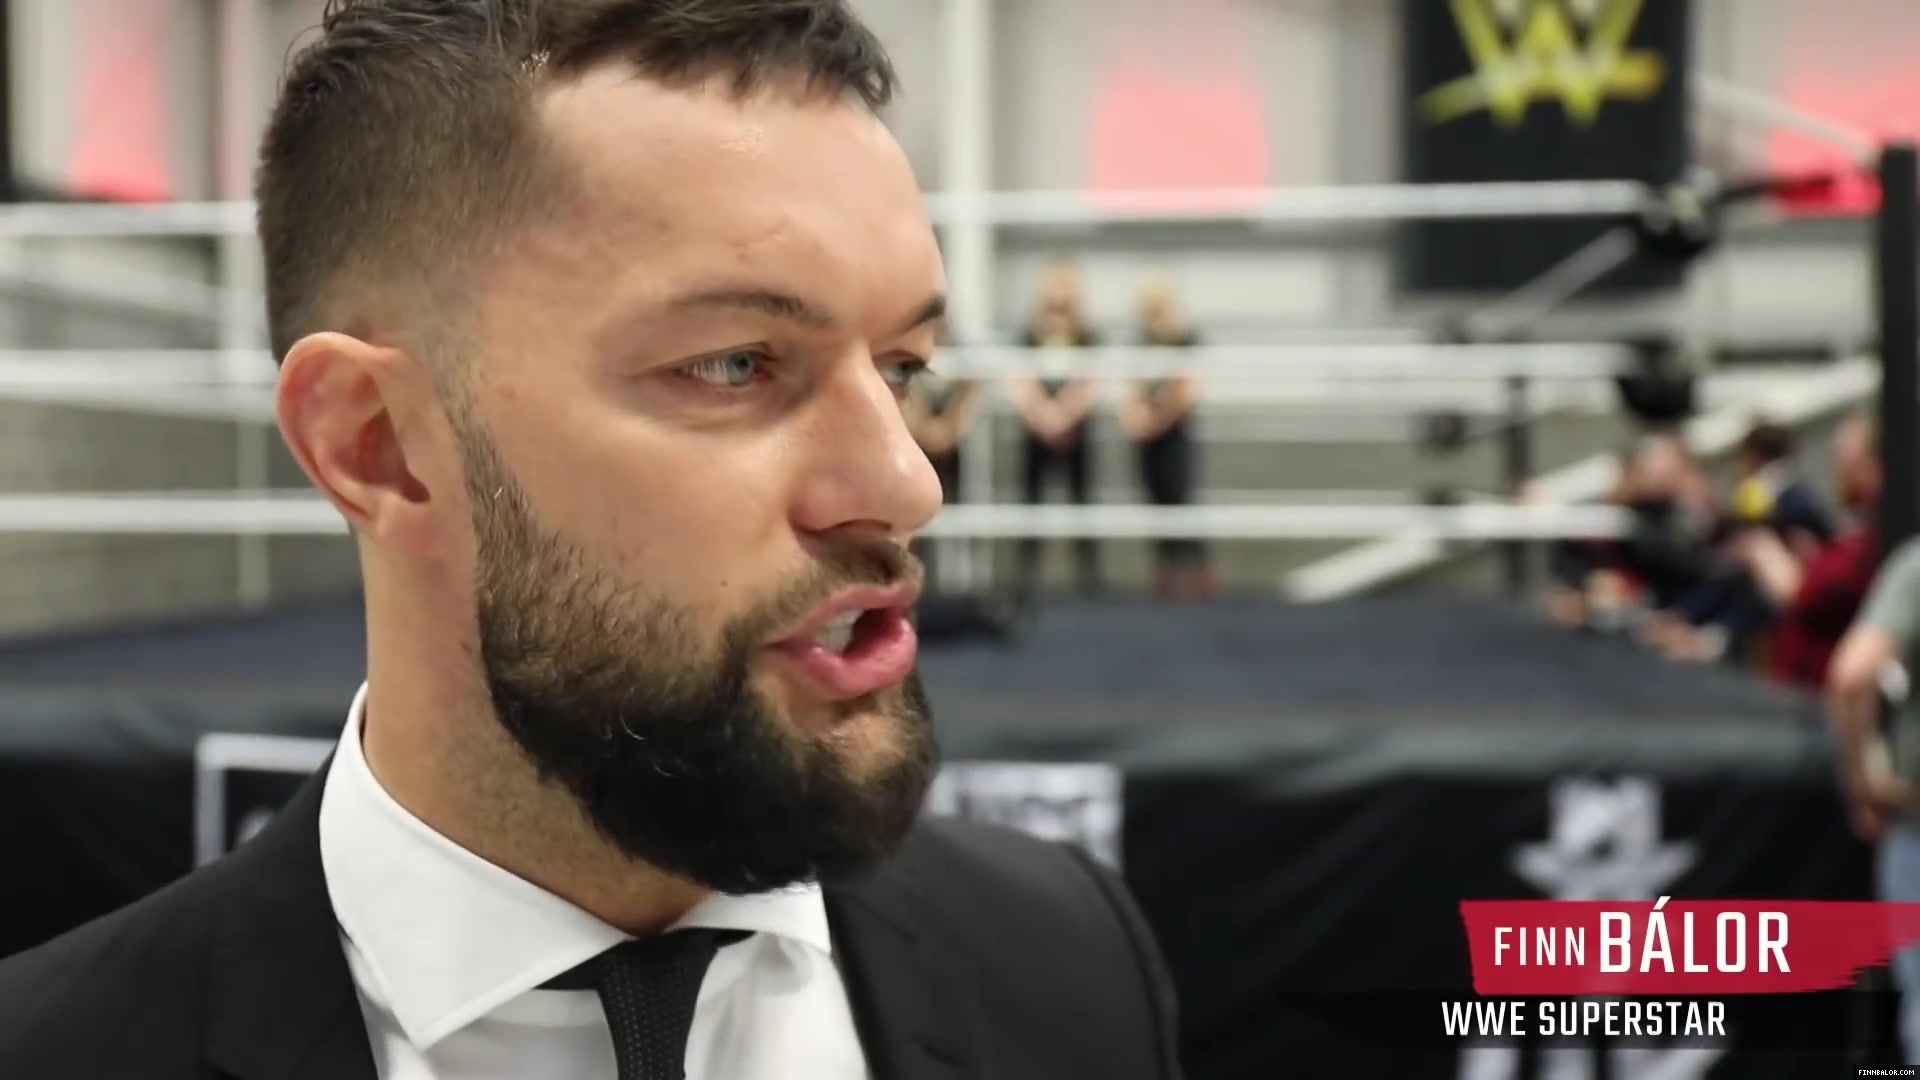 WWE_Superstar_FINN_BALOR_joins_MOUSTACHE_MOUNTAIN_at_the_opening_of_the_NXT_UK_PC_046.jpg